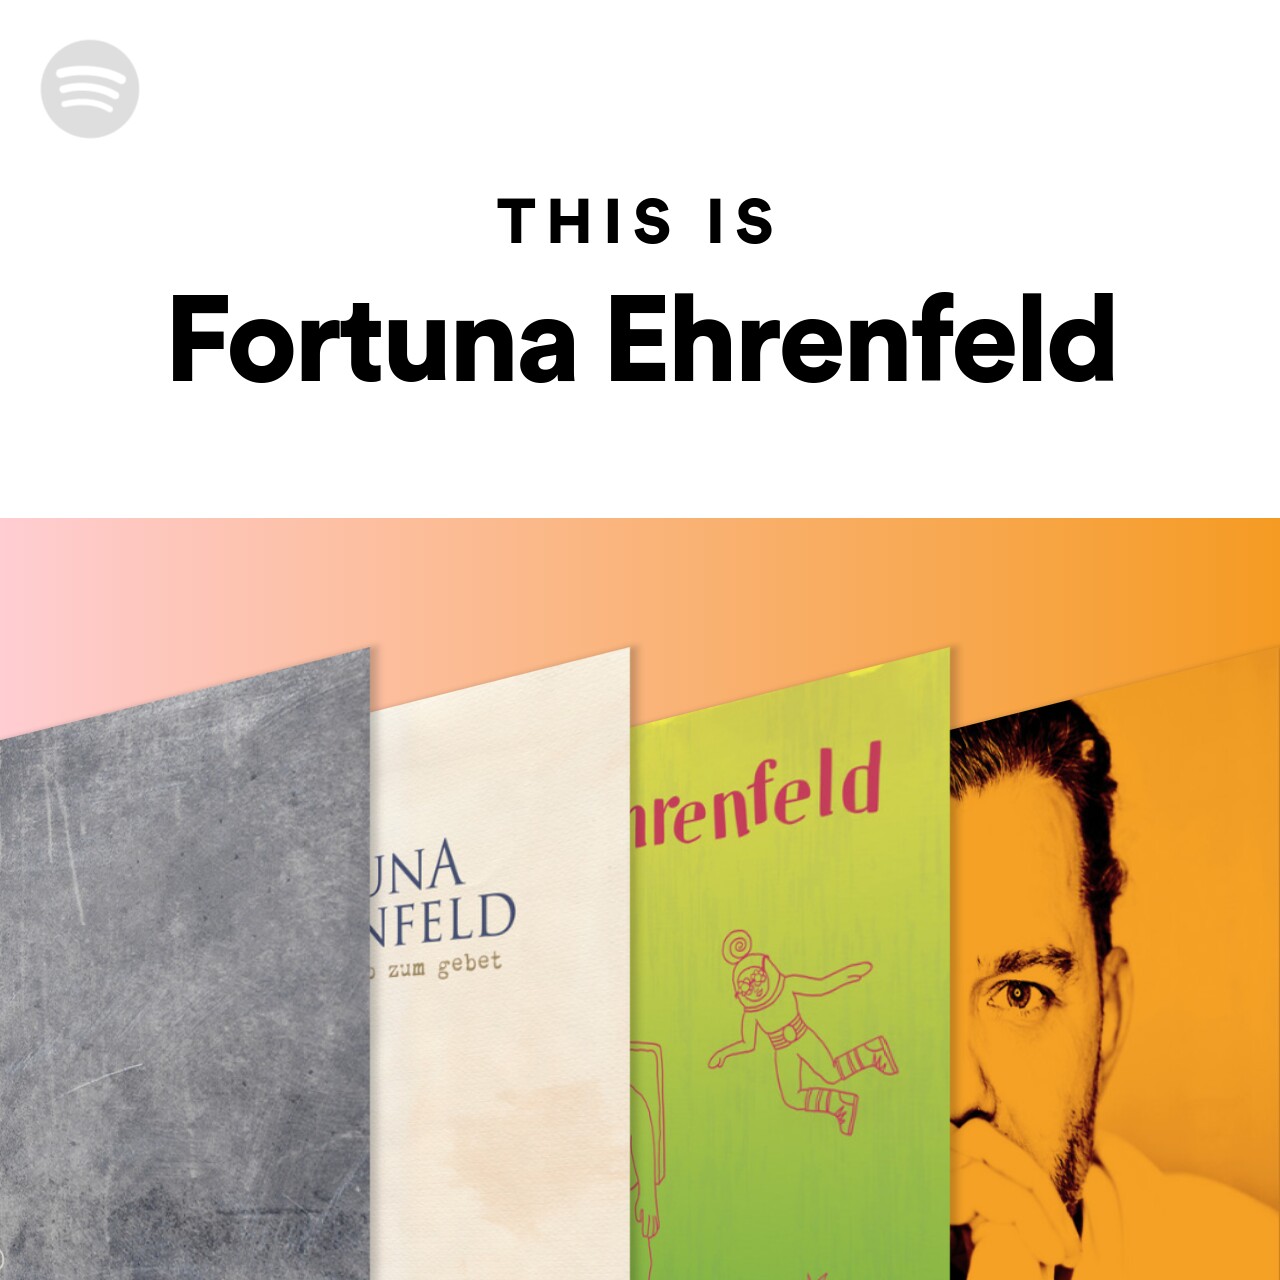 This Is Fortuna Ehrenfeld